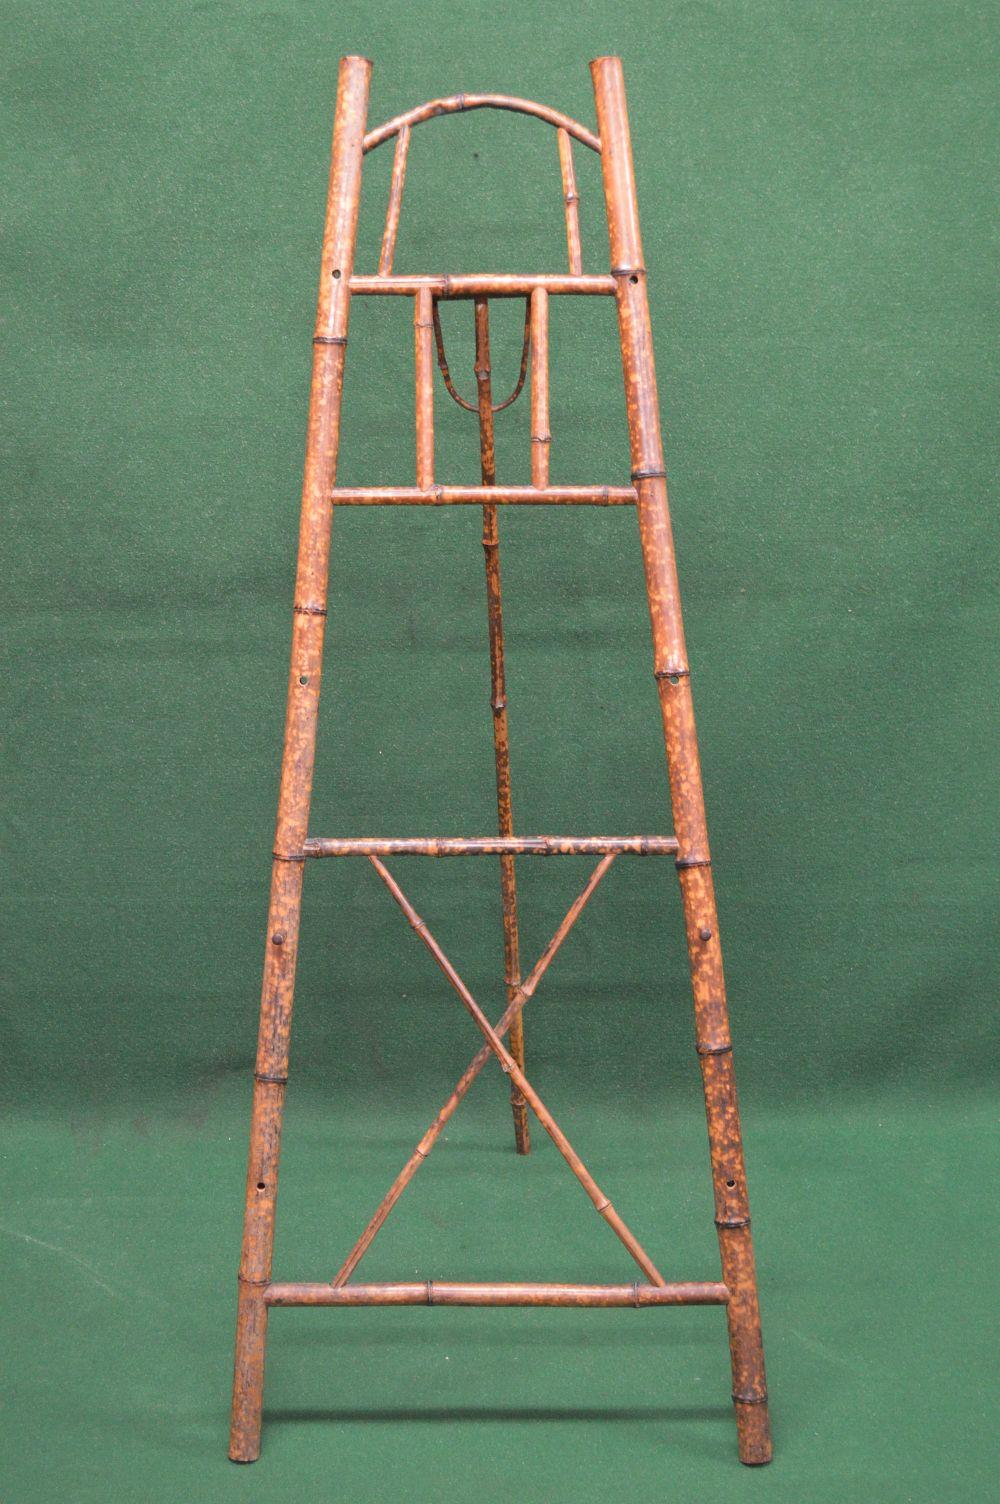 Bamboo picture easel having adjustable rests - 57" tall Please note descriptions are not condition